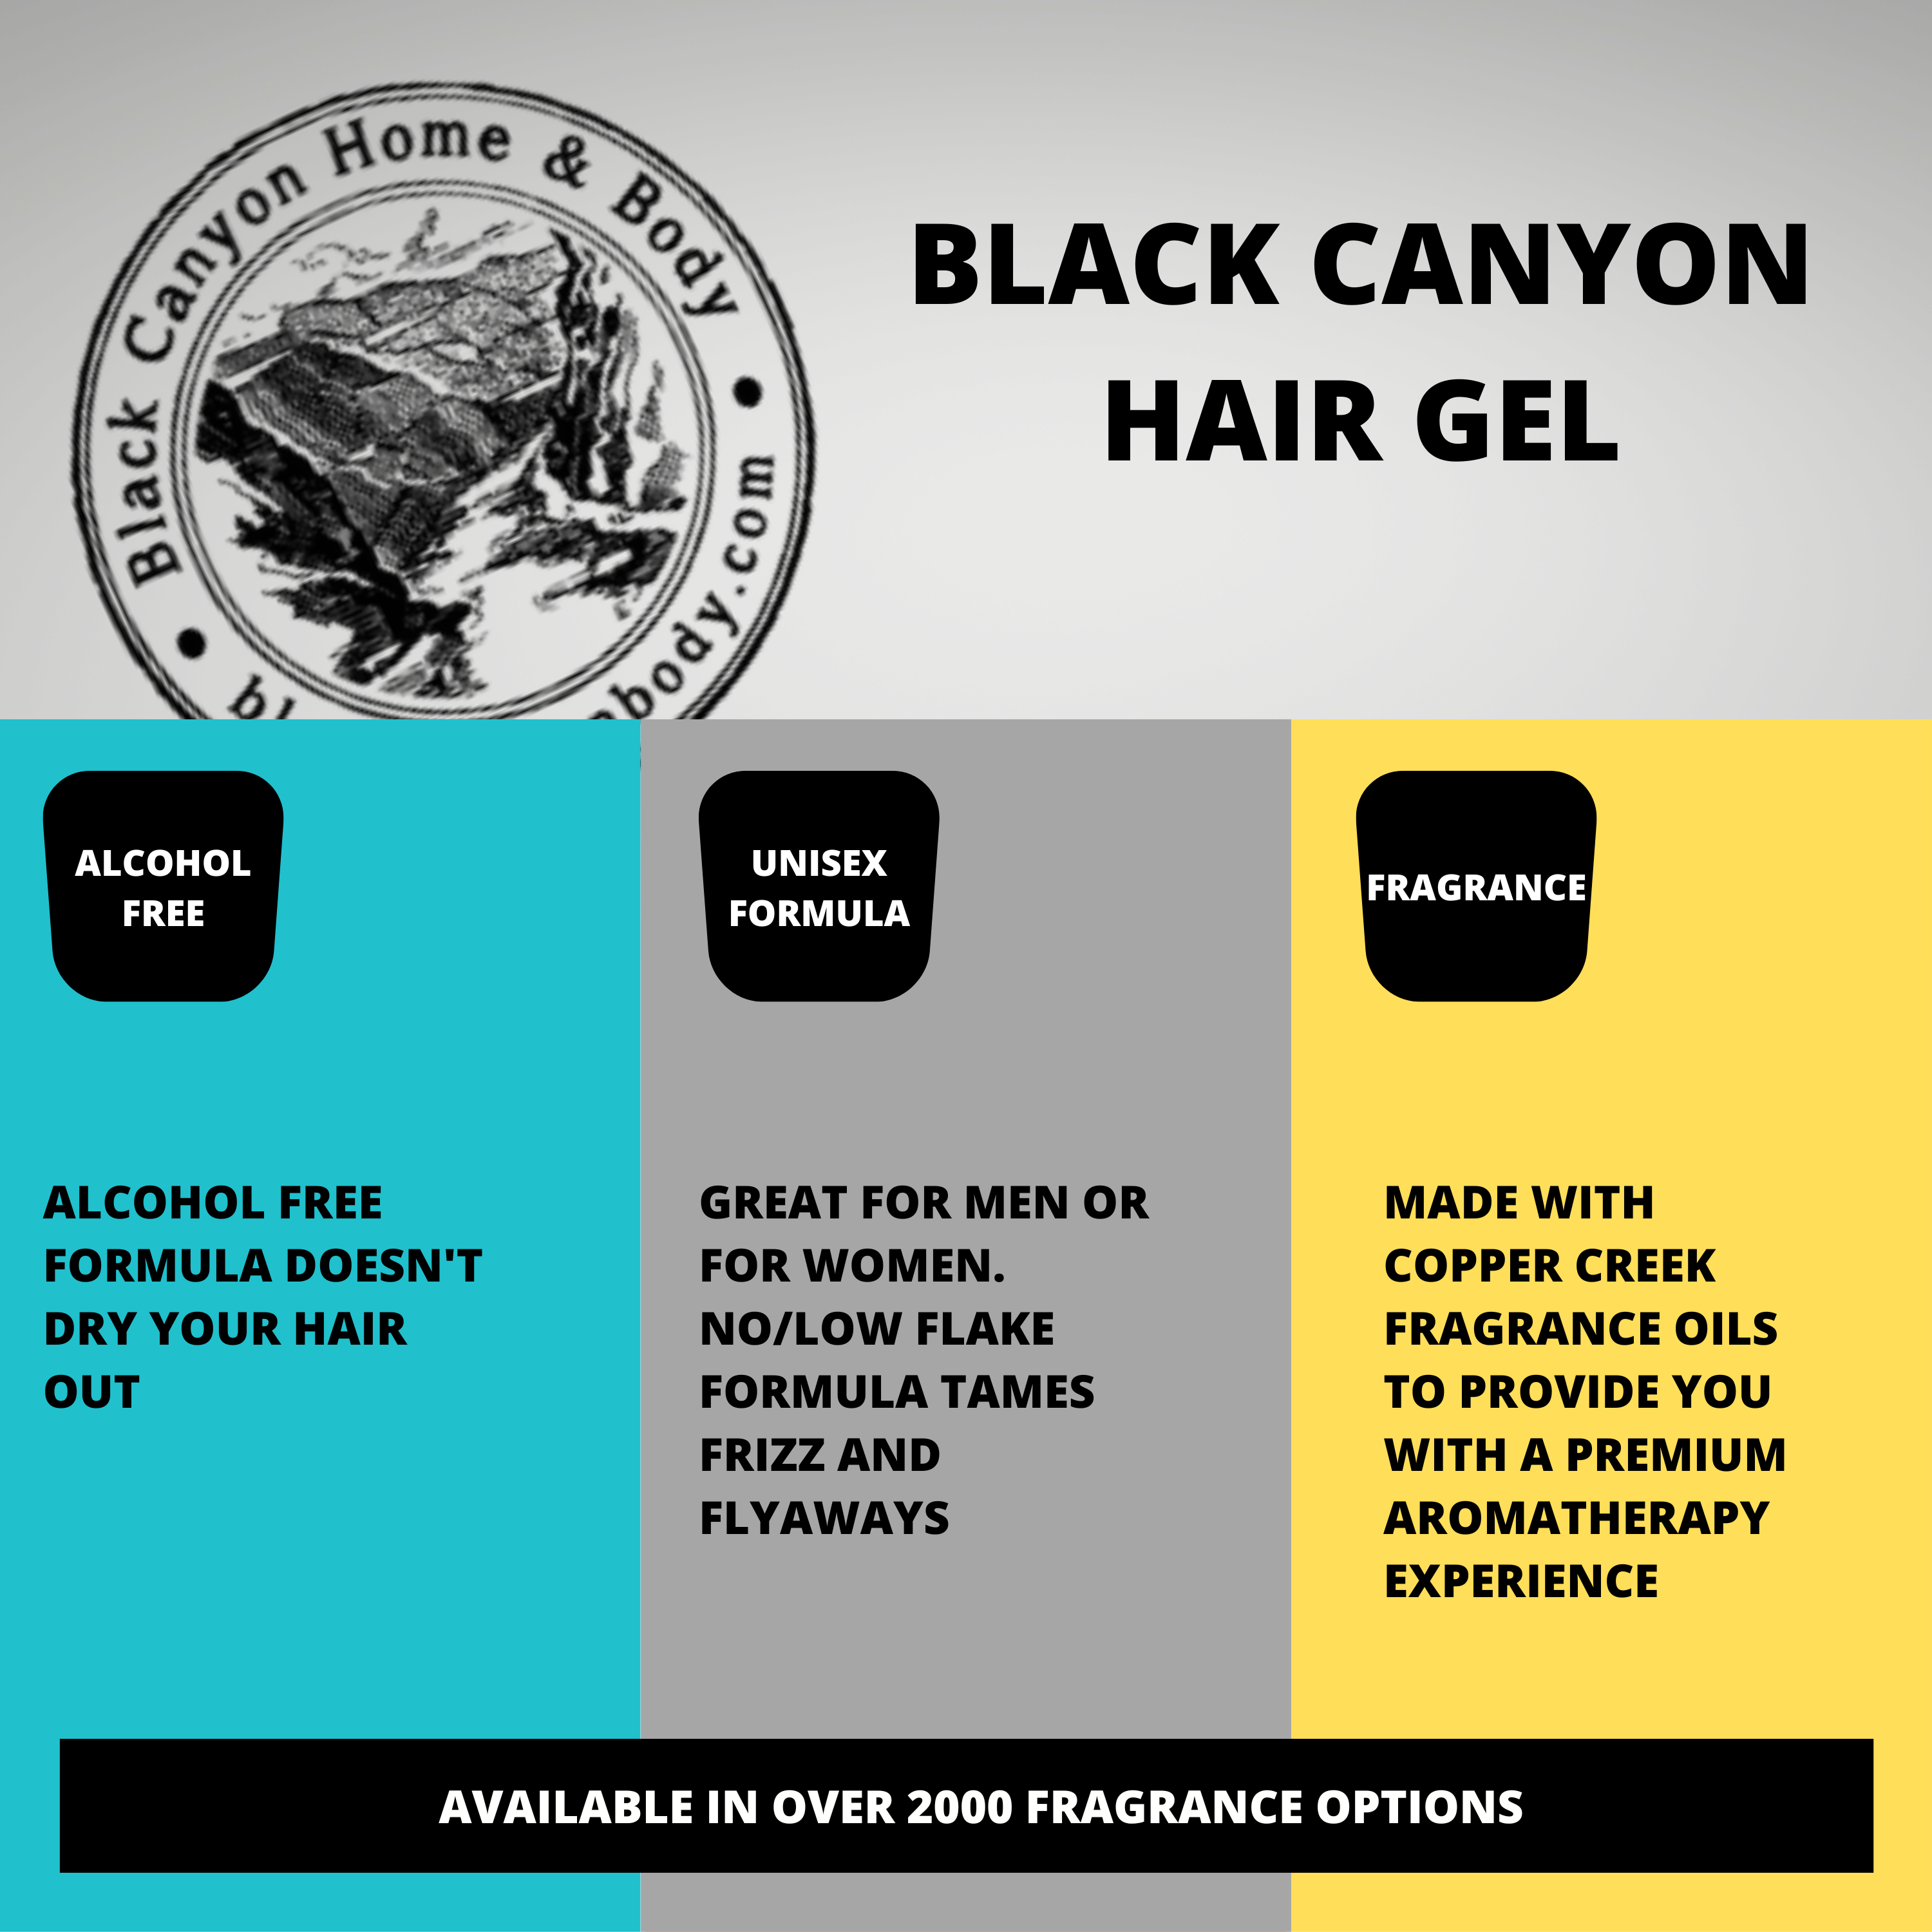 Black Canyon Berry & Orange Blossom Scented Hair Gel